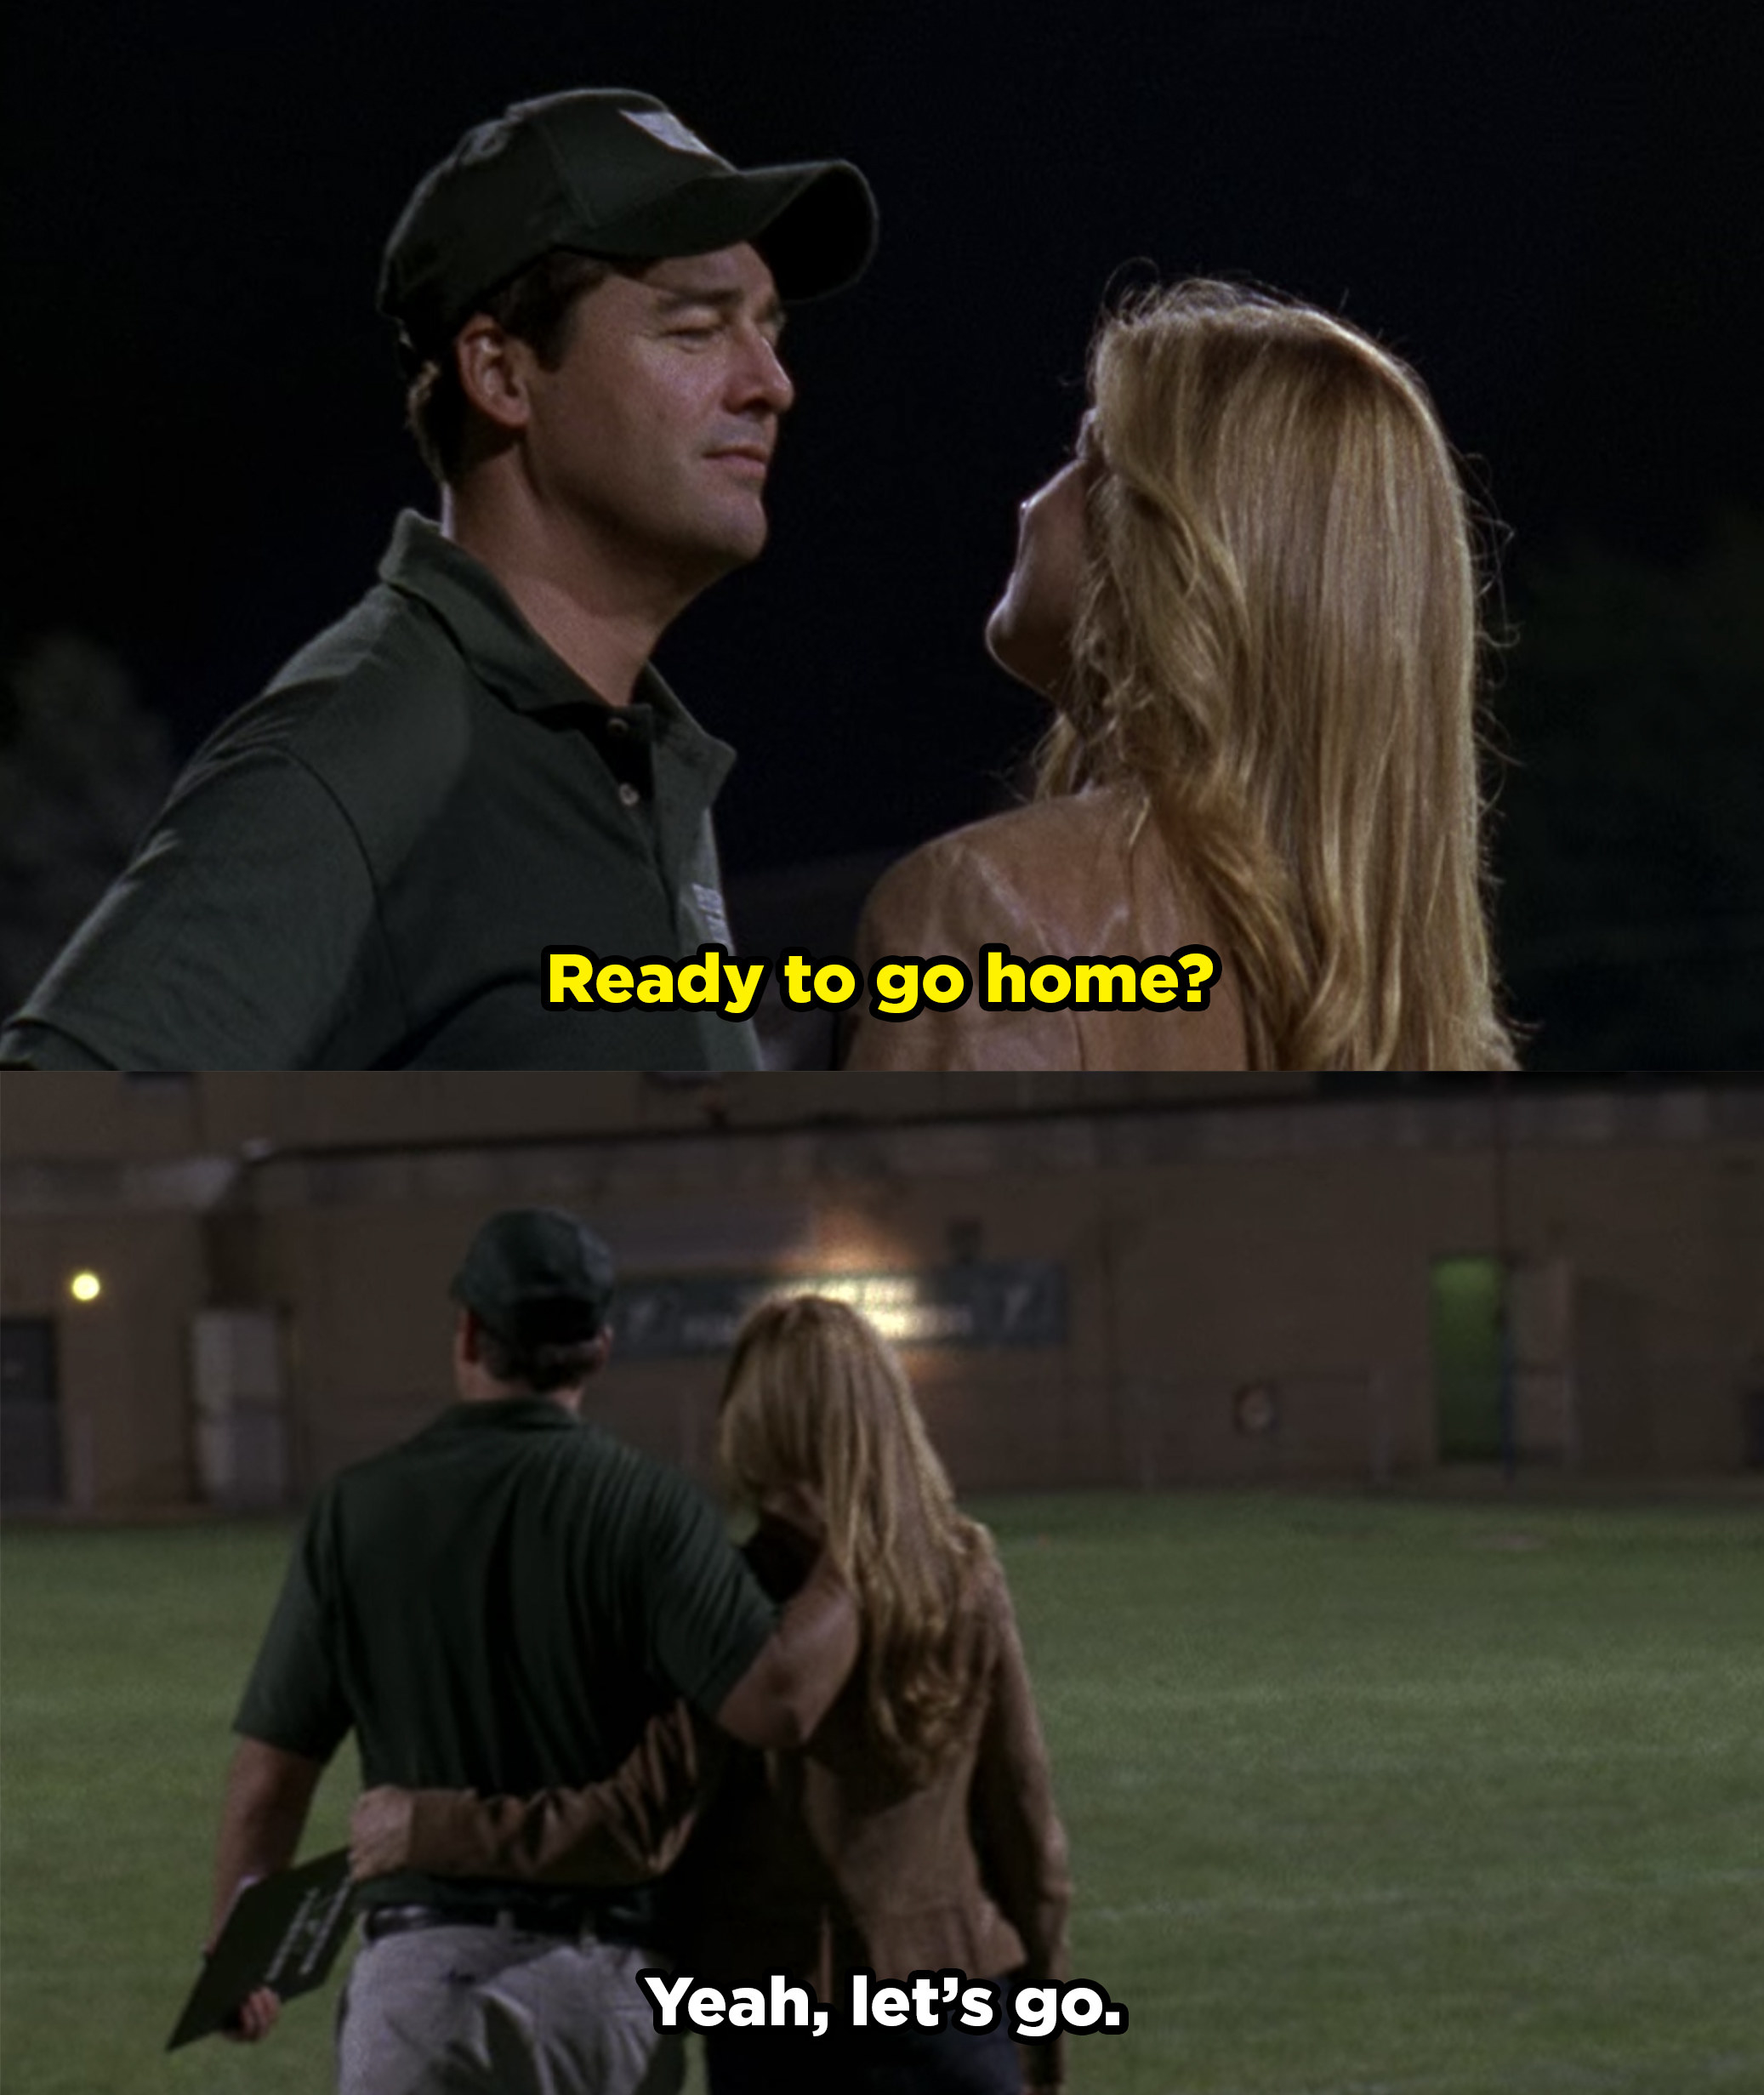 Tammy asks Eric if he&#x27;s ready to go and they walk off the field with their arms around each other